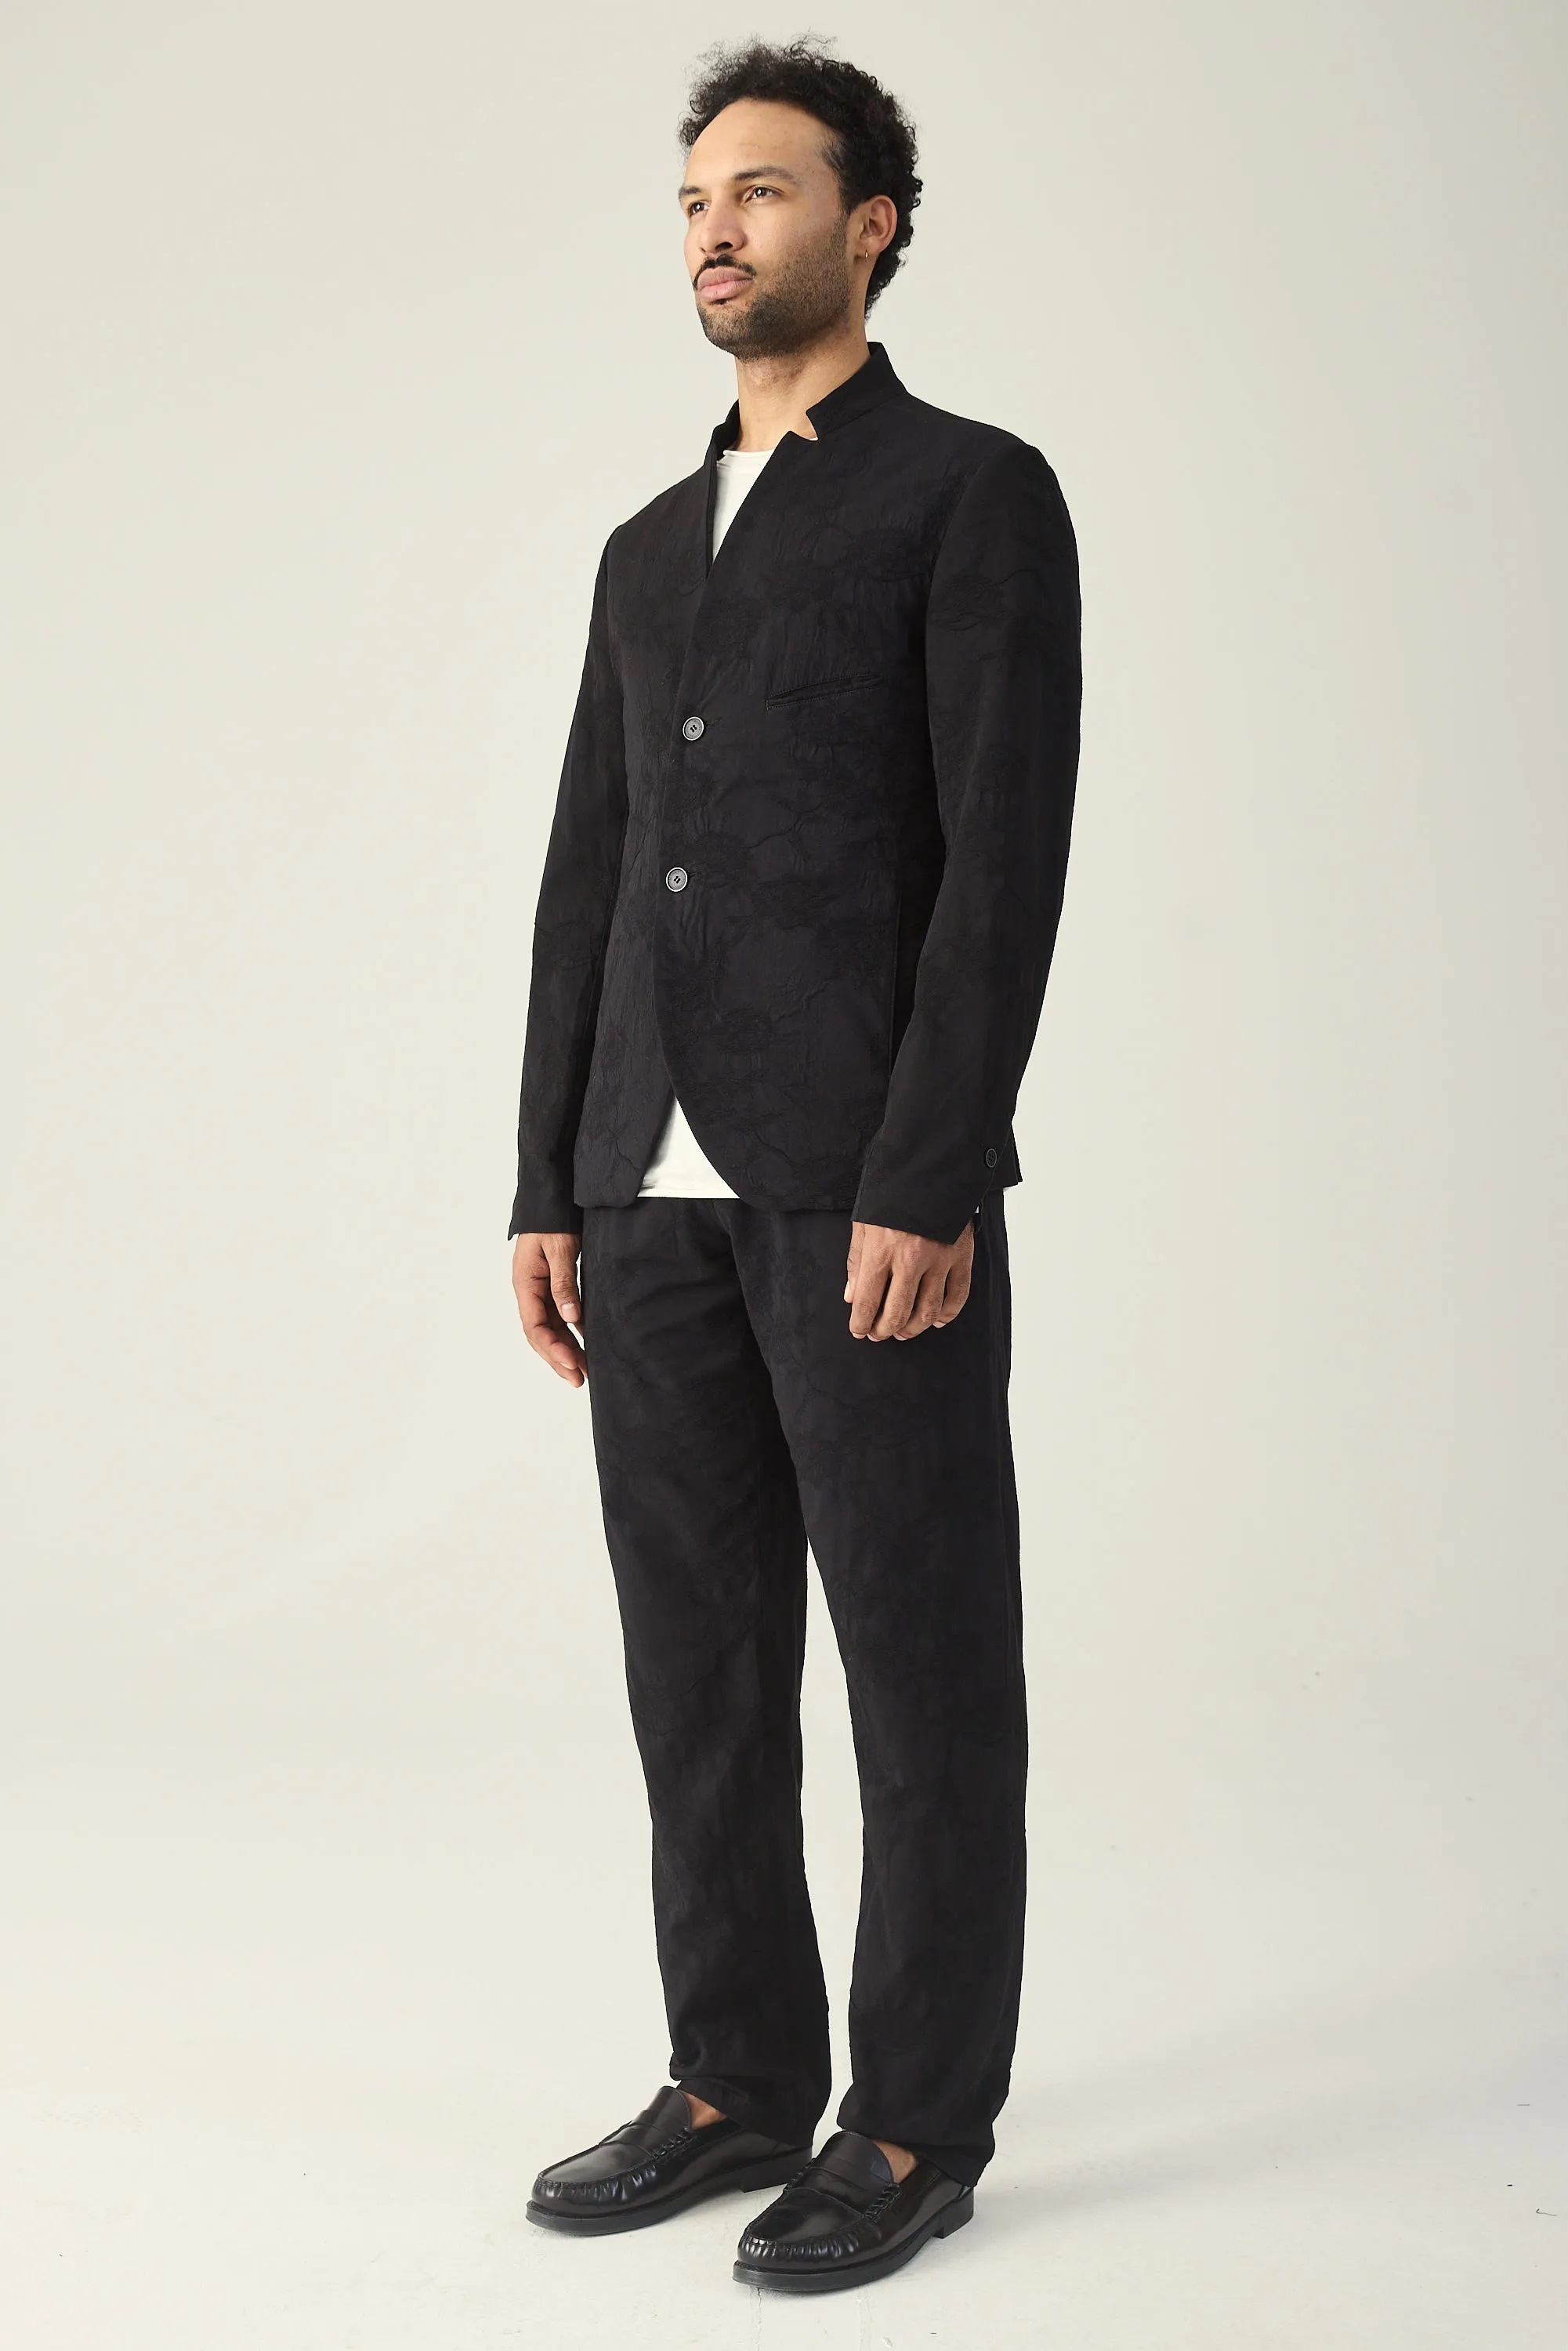 HANNIBAL. Embroidered Trouser Hannes in Black 46